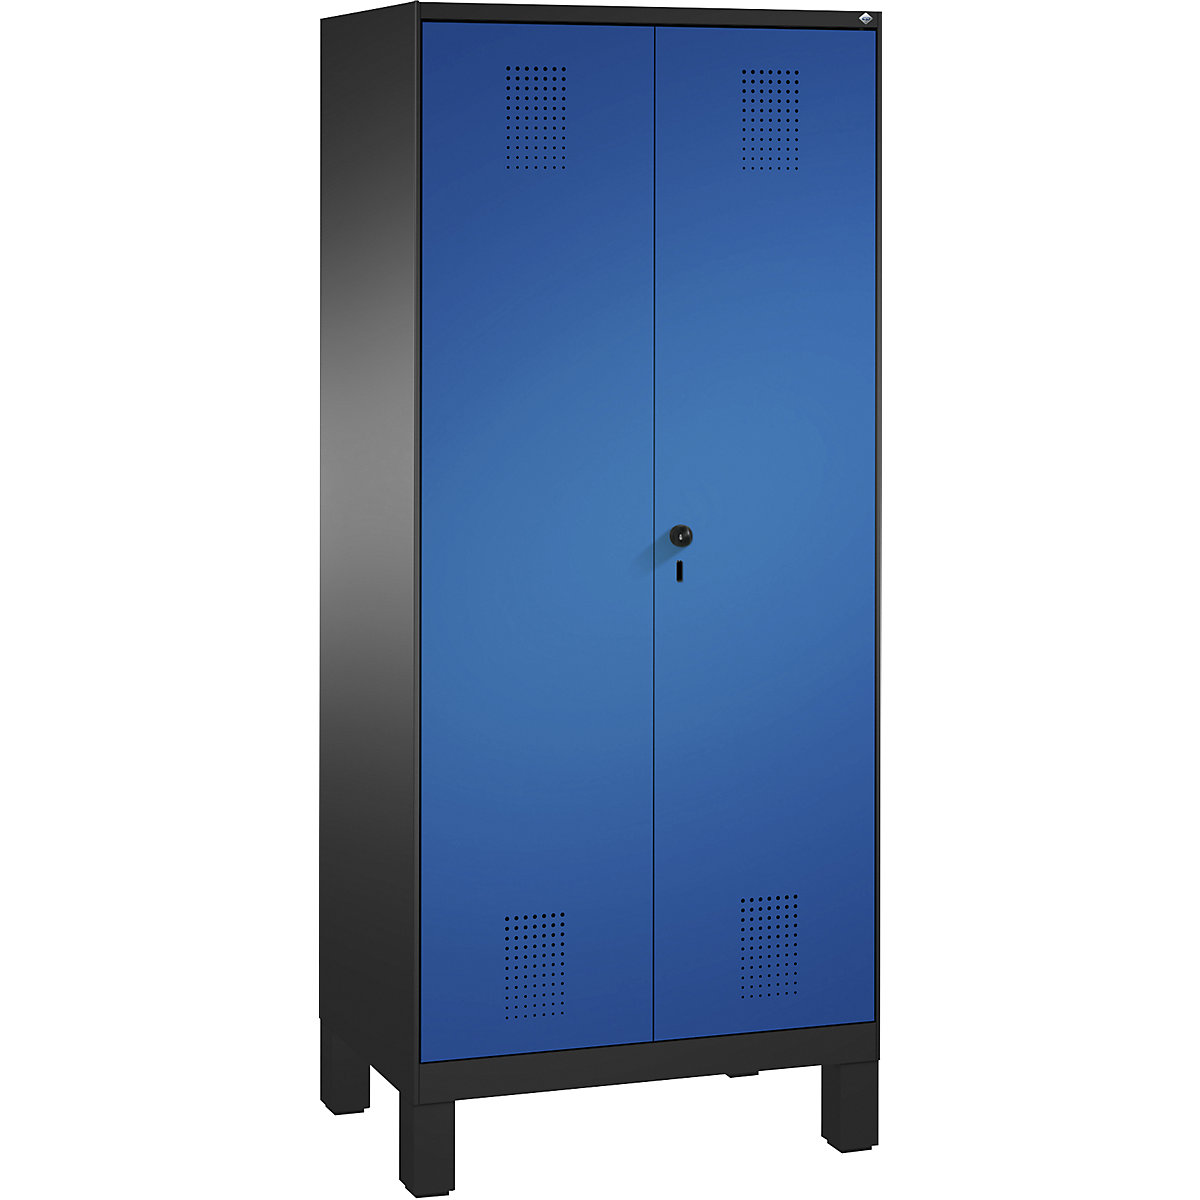 EVOLO storage cupboard, doors close in the middle, with feet – C+P, 2 compartments, 8 shelves, compartment width 400 mm, black grey / gentian blue-3